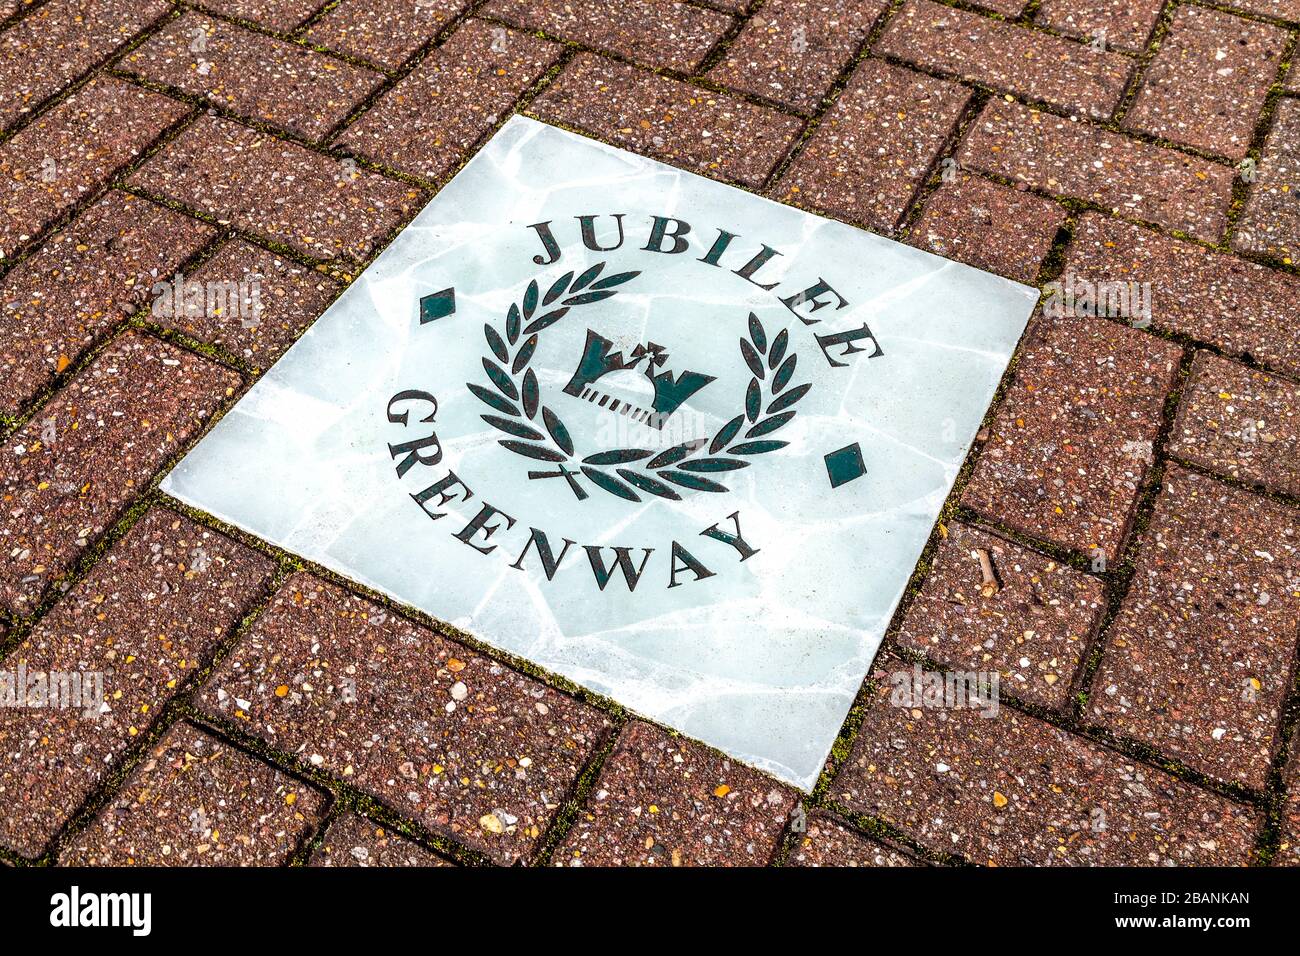 Sign for Jubilee Greenway walking path in the ground, London, UK Stock Photo